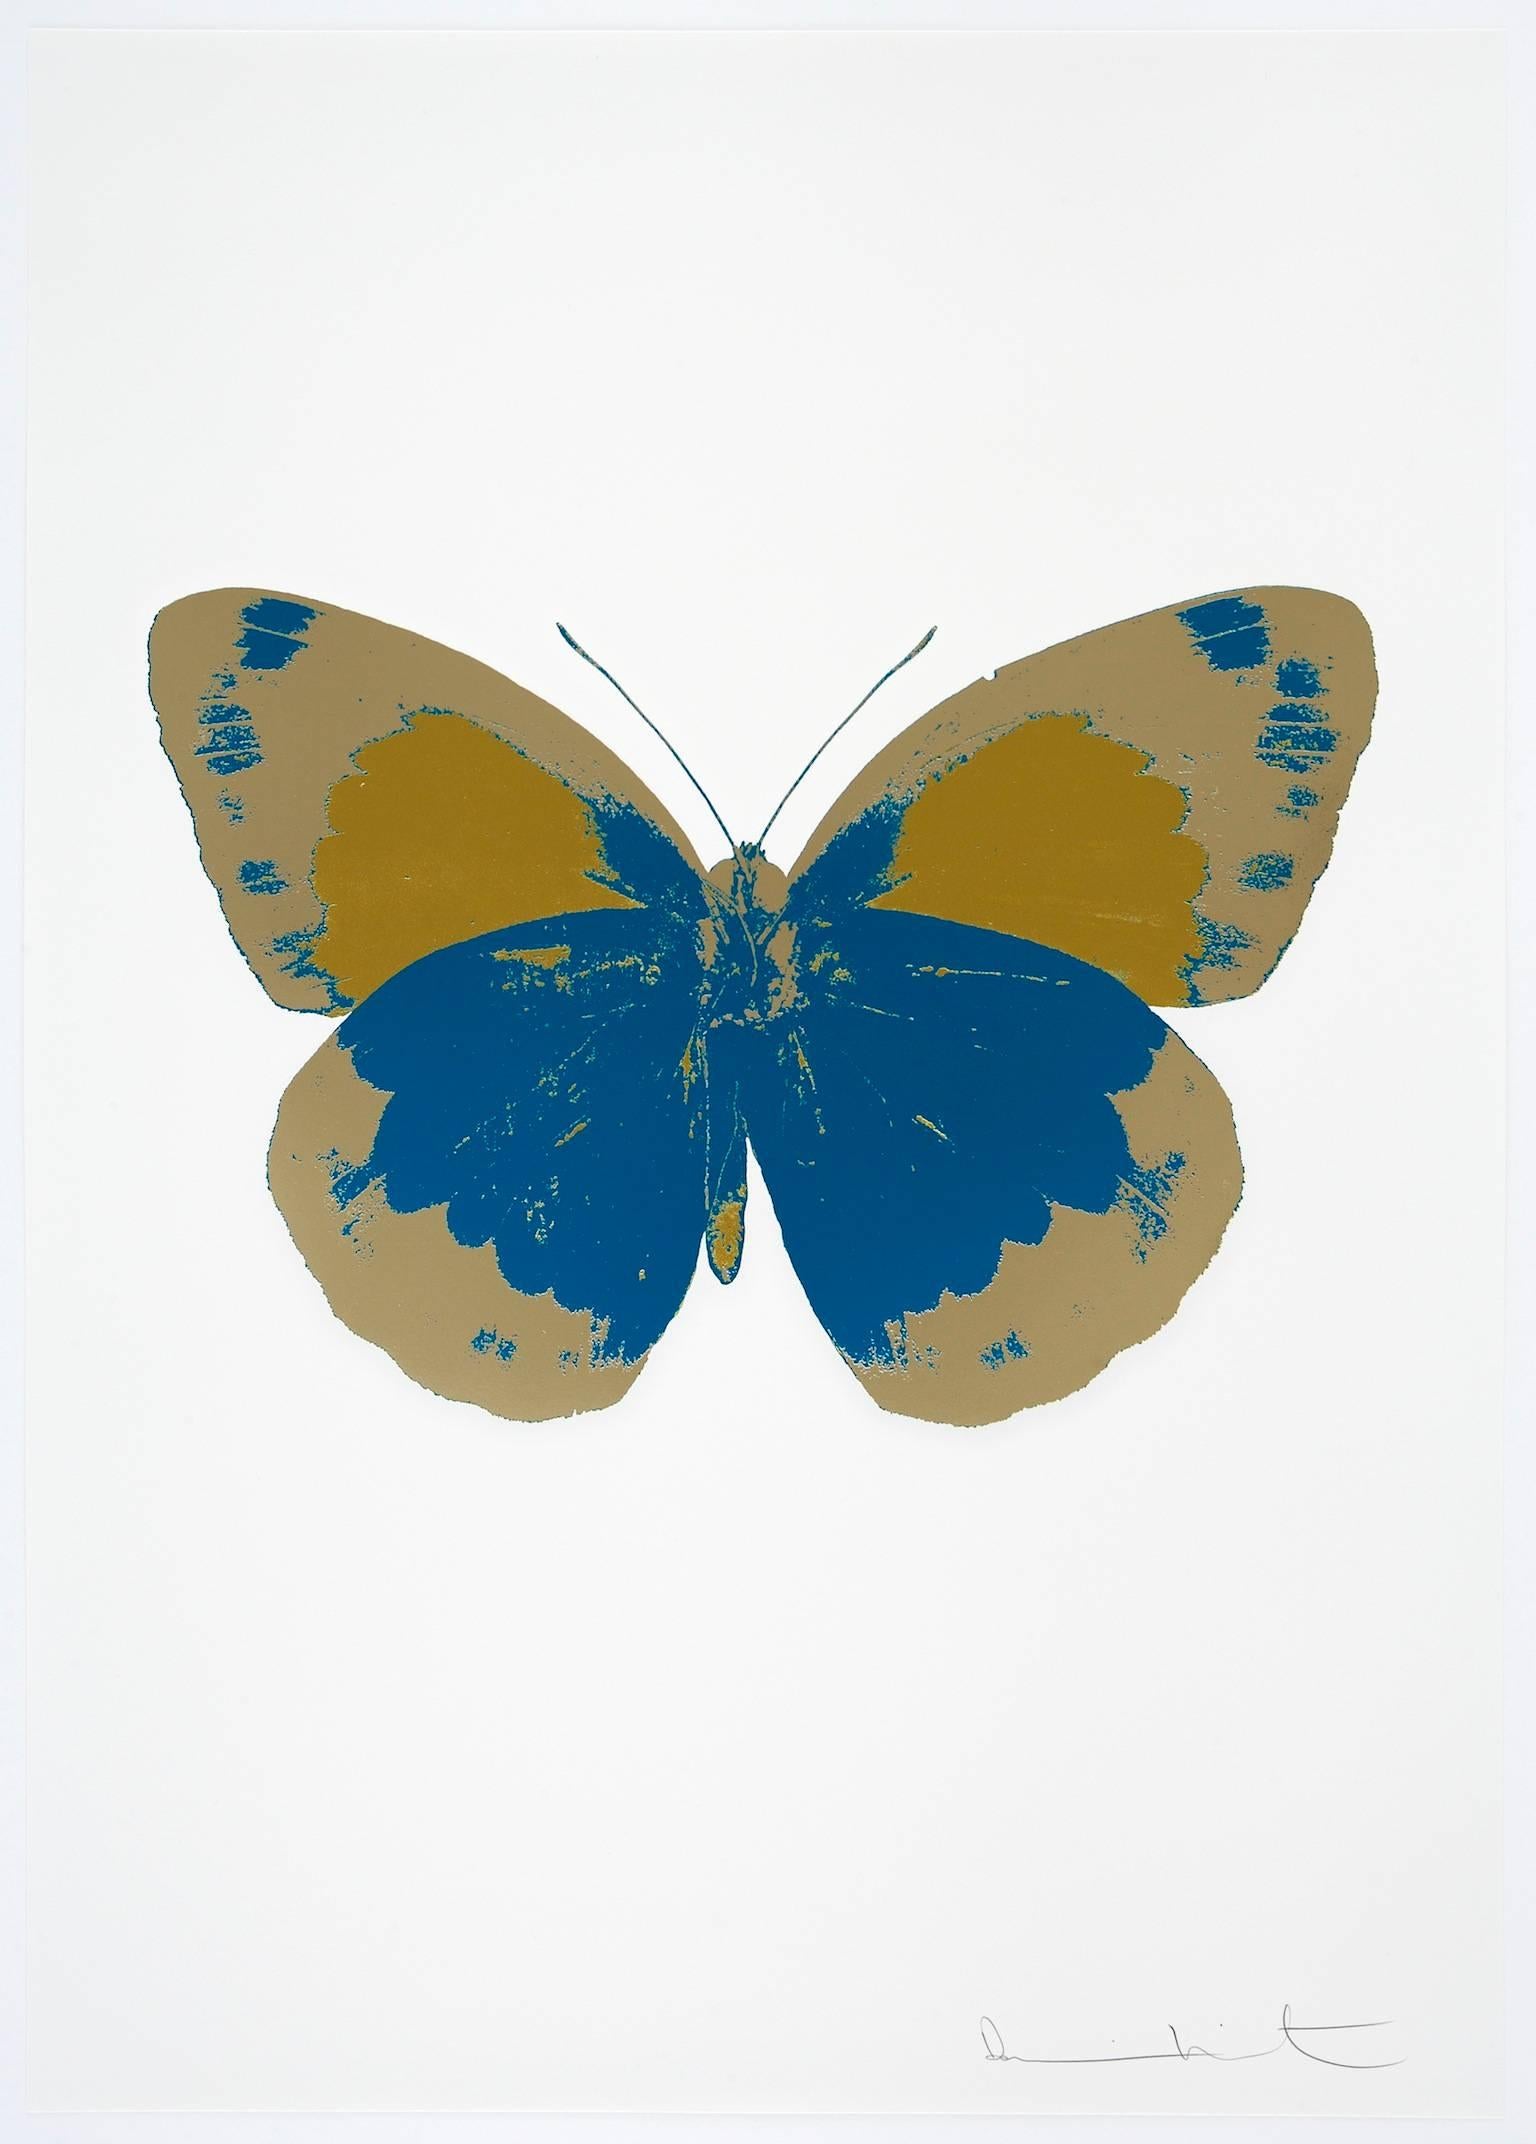 The Souls II - Turquoise - Cool Gold - Oriental Gold - Print by Damien Hirst